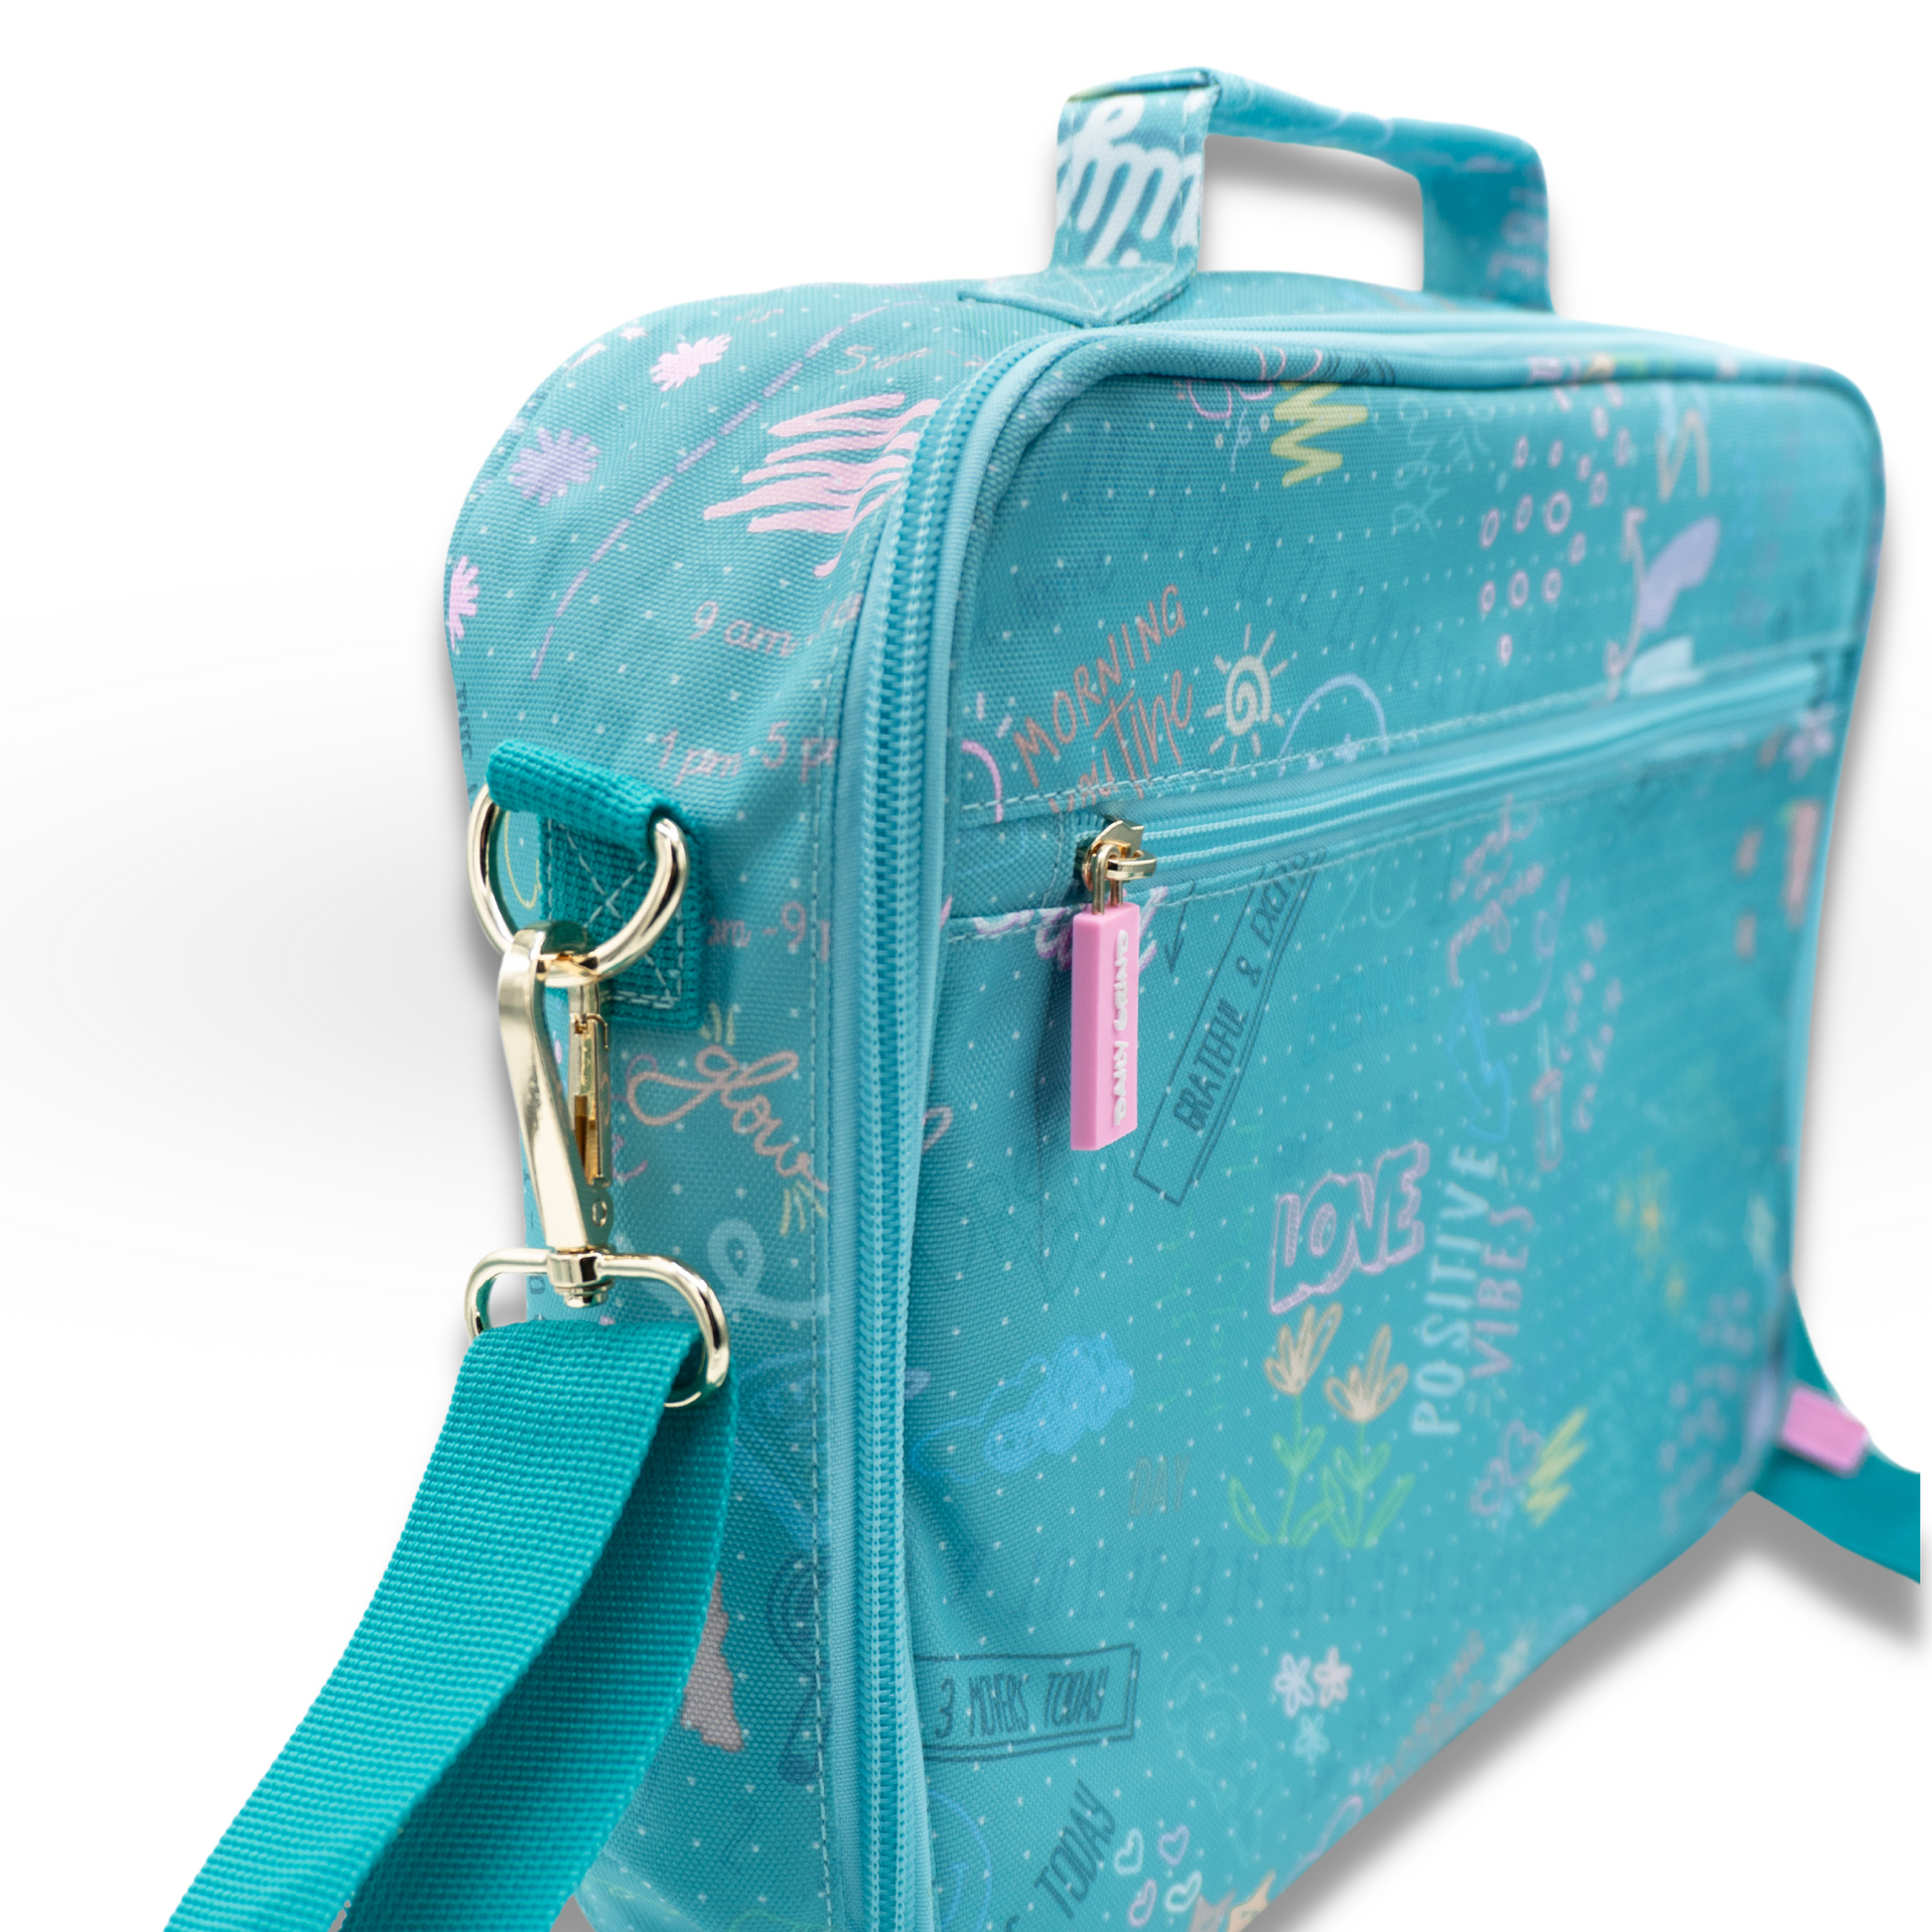 Side view of teal travel planner case